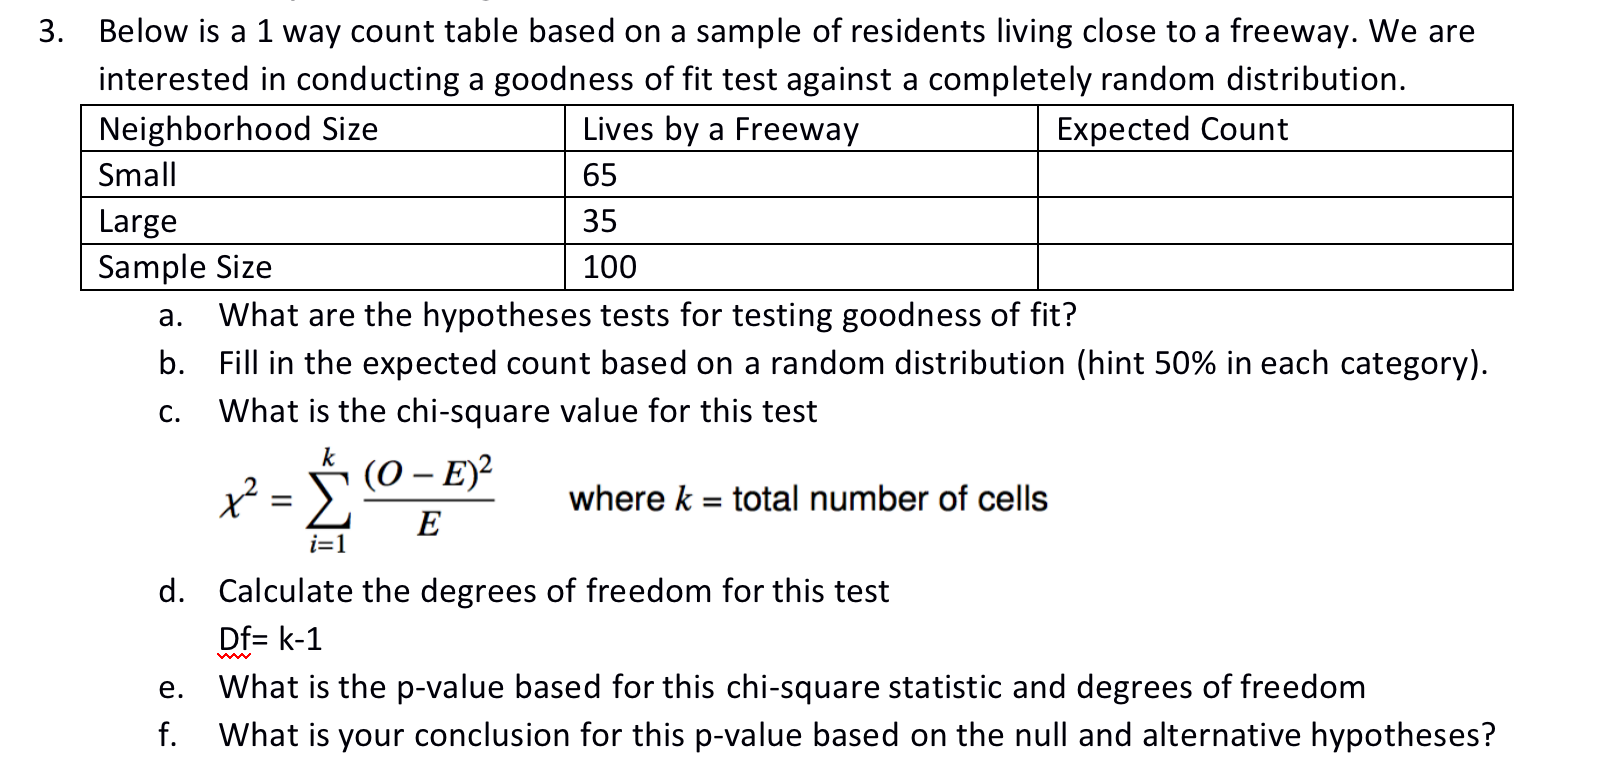 3 Below Is A 1 Way Count Table Based On A Sample Of Residents Living Close To A Freeway We Are Interested In Conductin 1